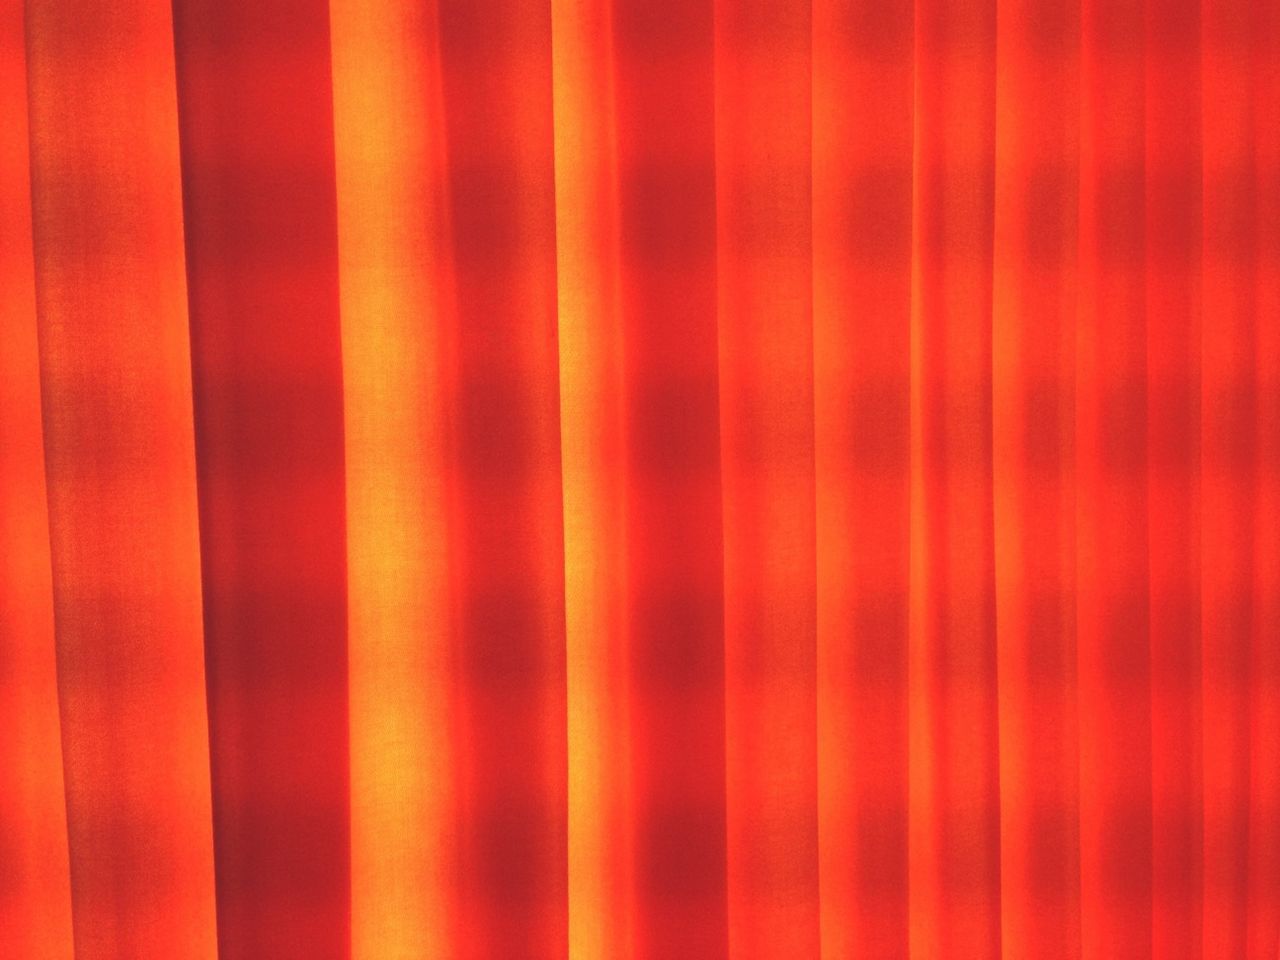 red, full frame, backgrounds, pattern, indoors, textured, close-up, orange color, textile, design, wall - building feature, no people, abstract, detail, in a row, repetition, vibrant color, fabric, multi colored, wall